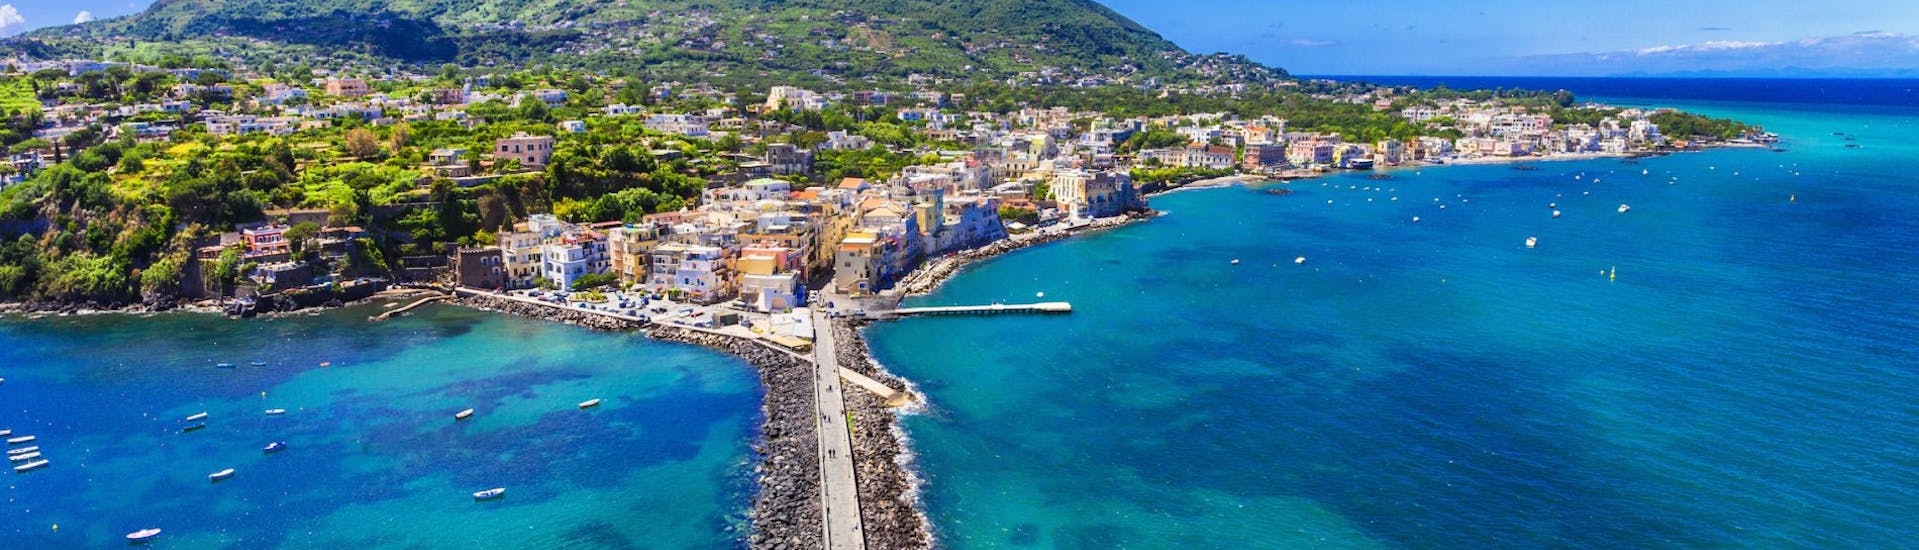 All participants of our Boat Trip from Ischia to Procida will be able to enjoy this amazing view of Ischia by boat.